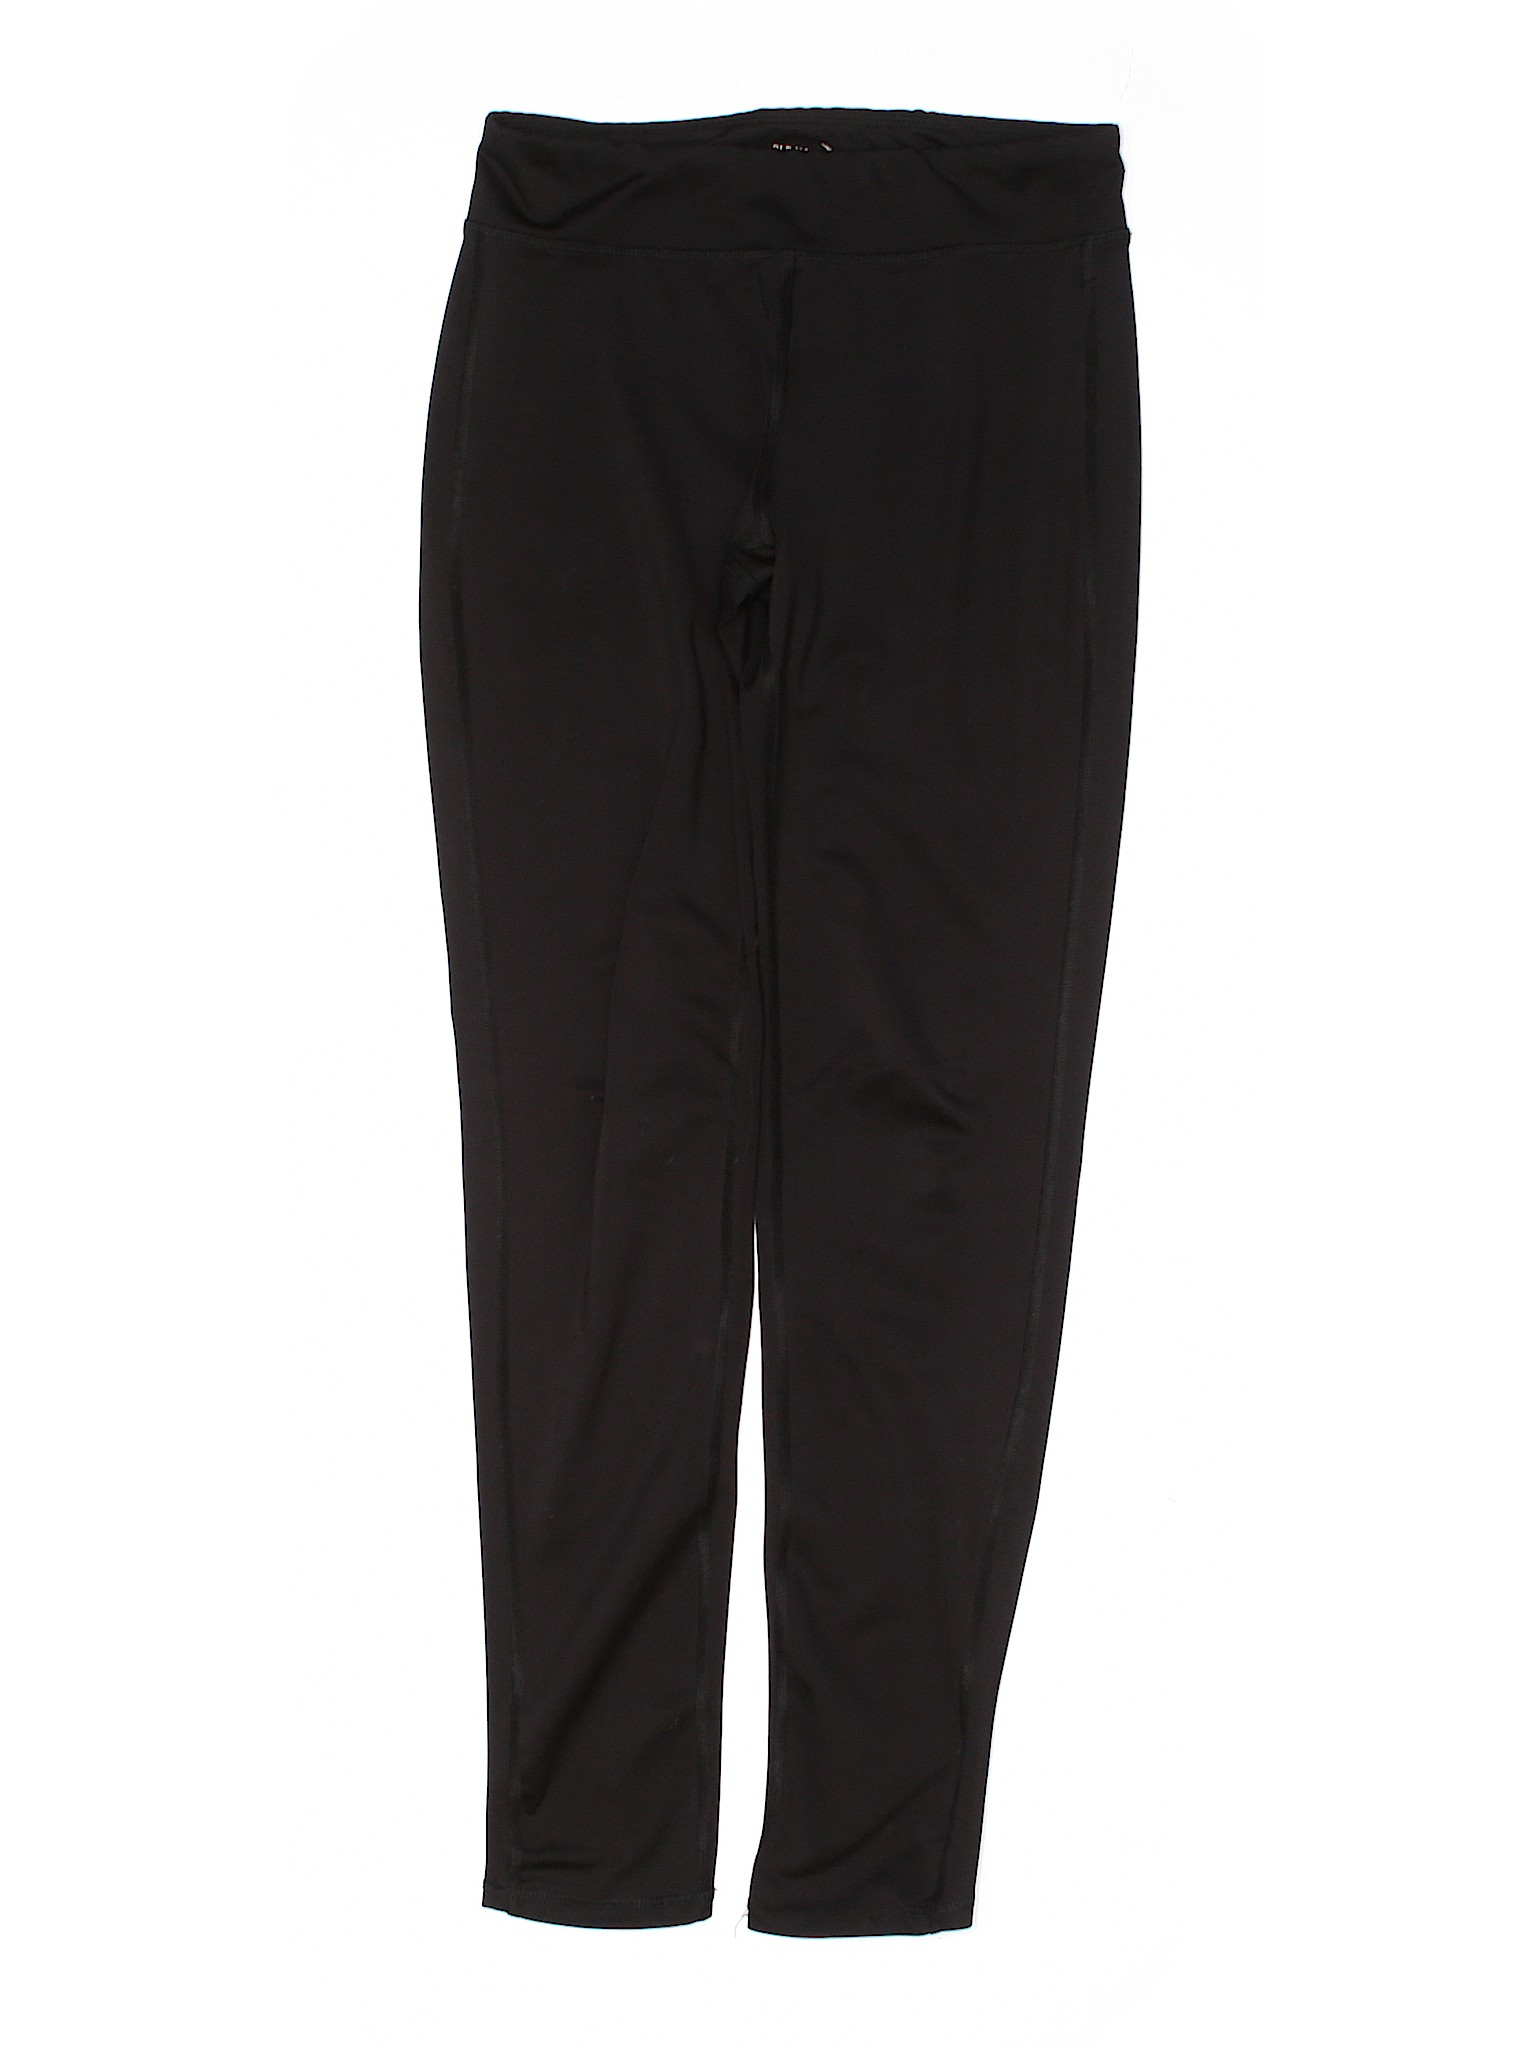 Active by Old Navy Black Active Pants Size 14 - 38% off | thredUP